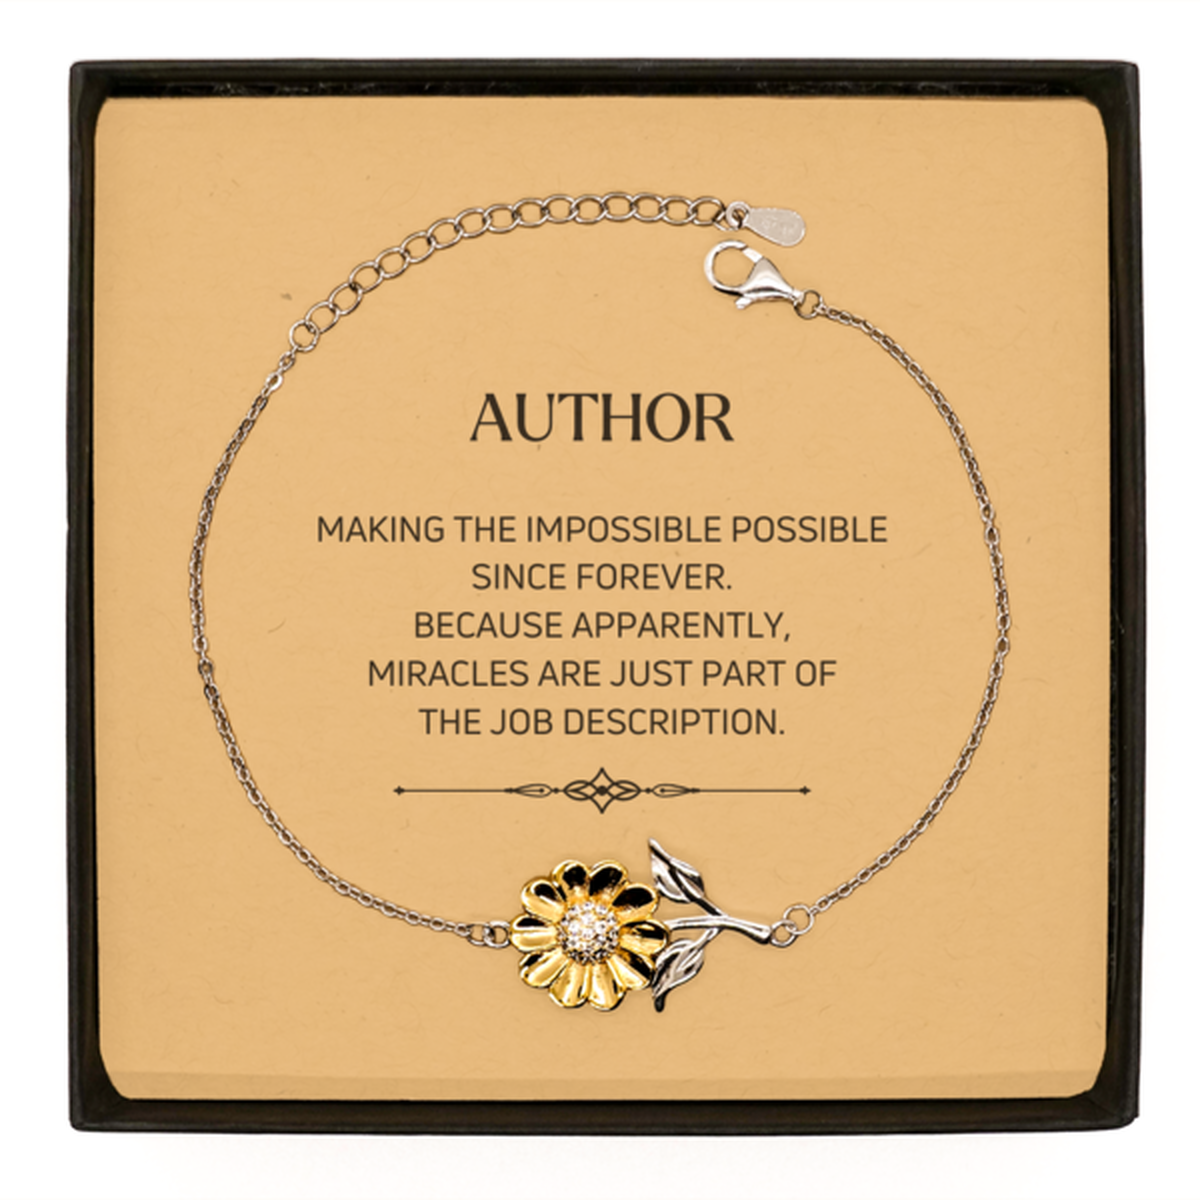 Funny Author Gifts, Miracles are just part of the job description, Inspirational Birthday Sunflower Bracelet For Author, Men, Women, Coworkers, Friends, Boss